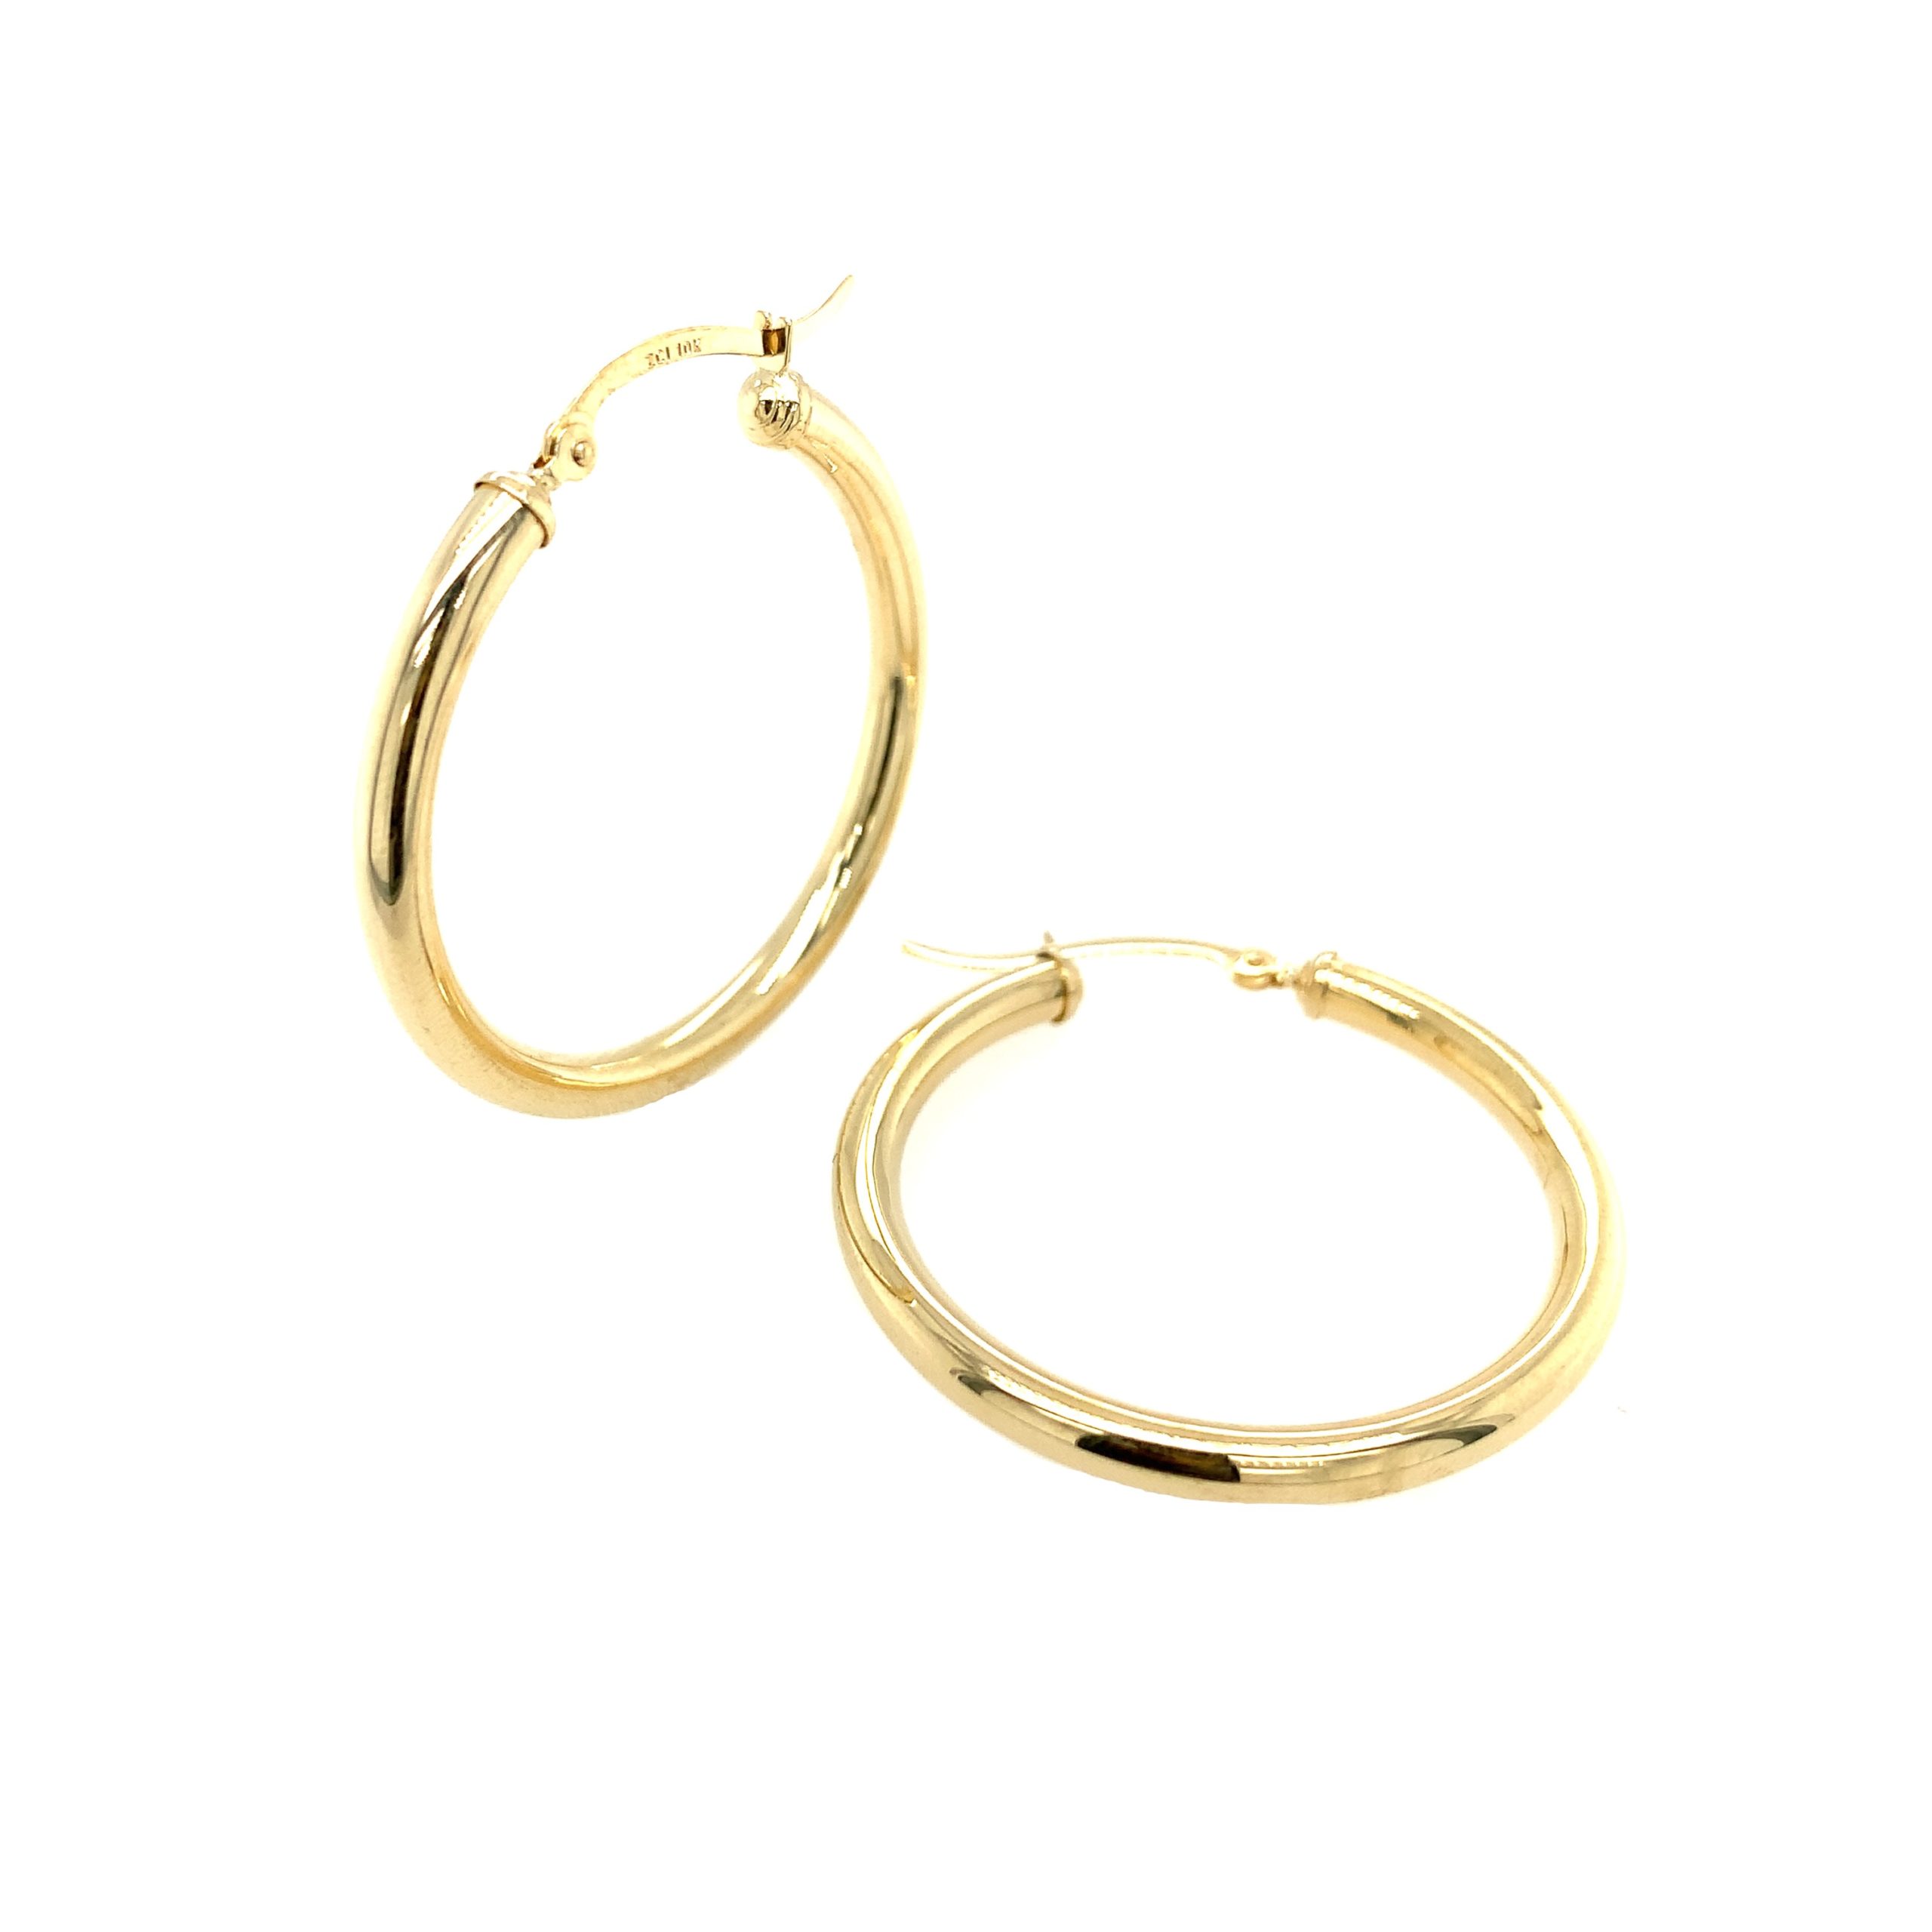 Yellow Gold Hoops